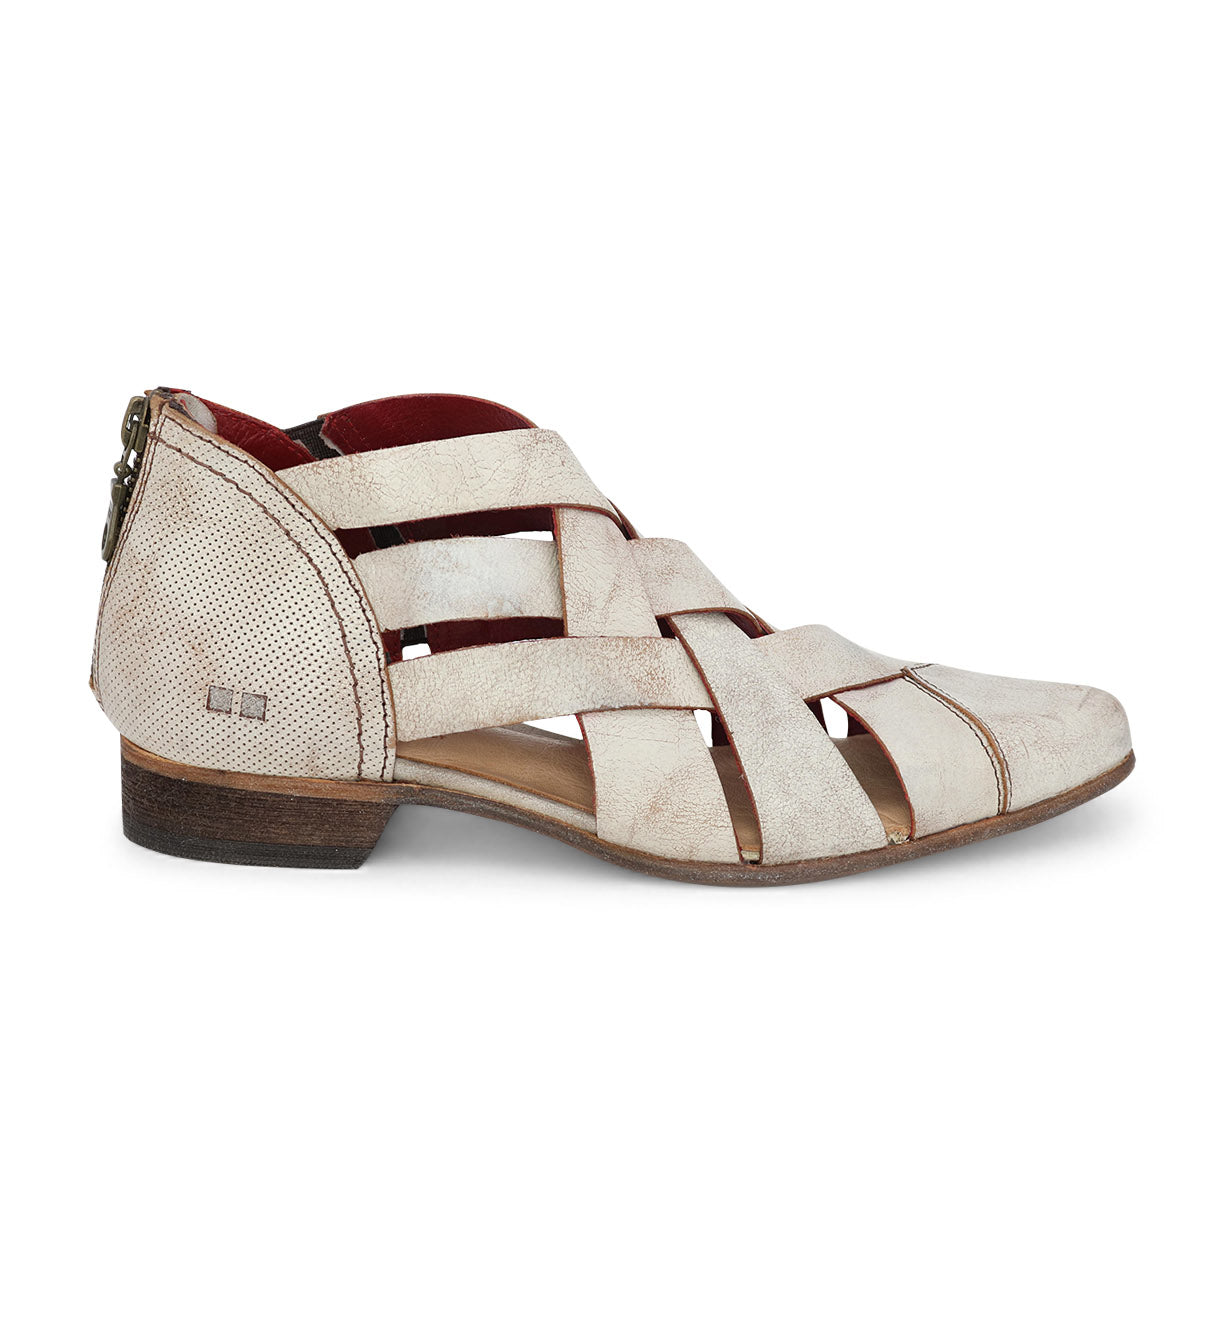 A women's white Brittany sandal with straps on the side by Bed Stu.